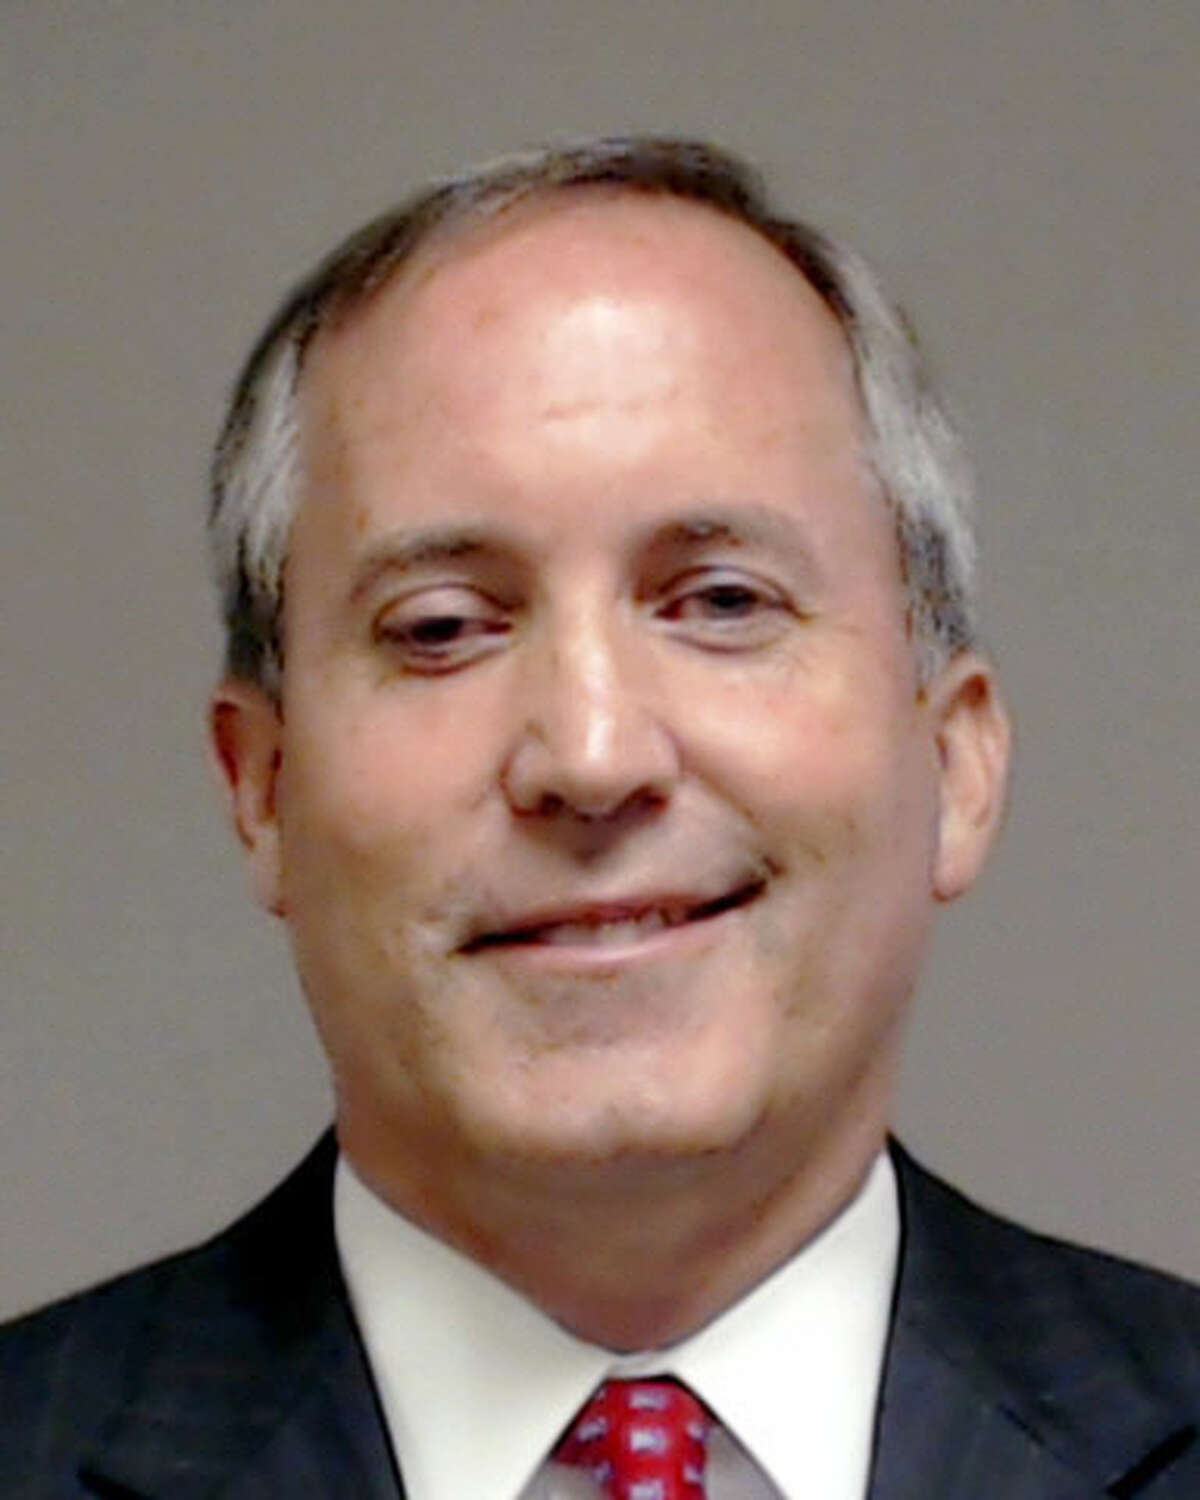 A grand jury this month indicted state Attorney General Ken Paxton on felony securities fraud charges.